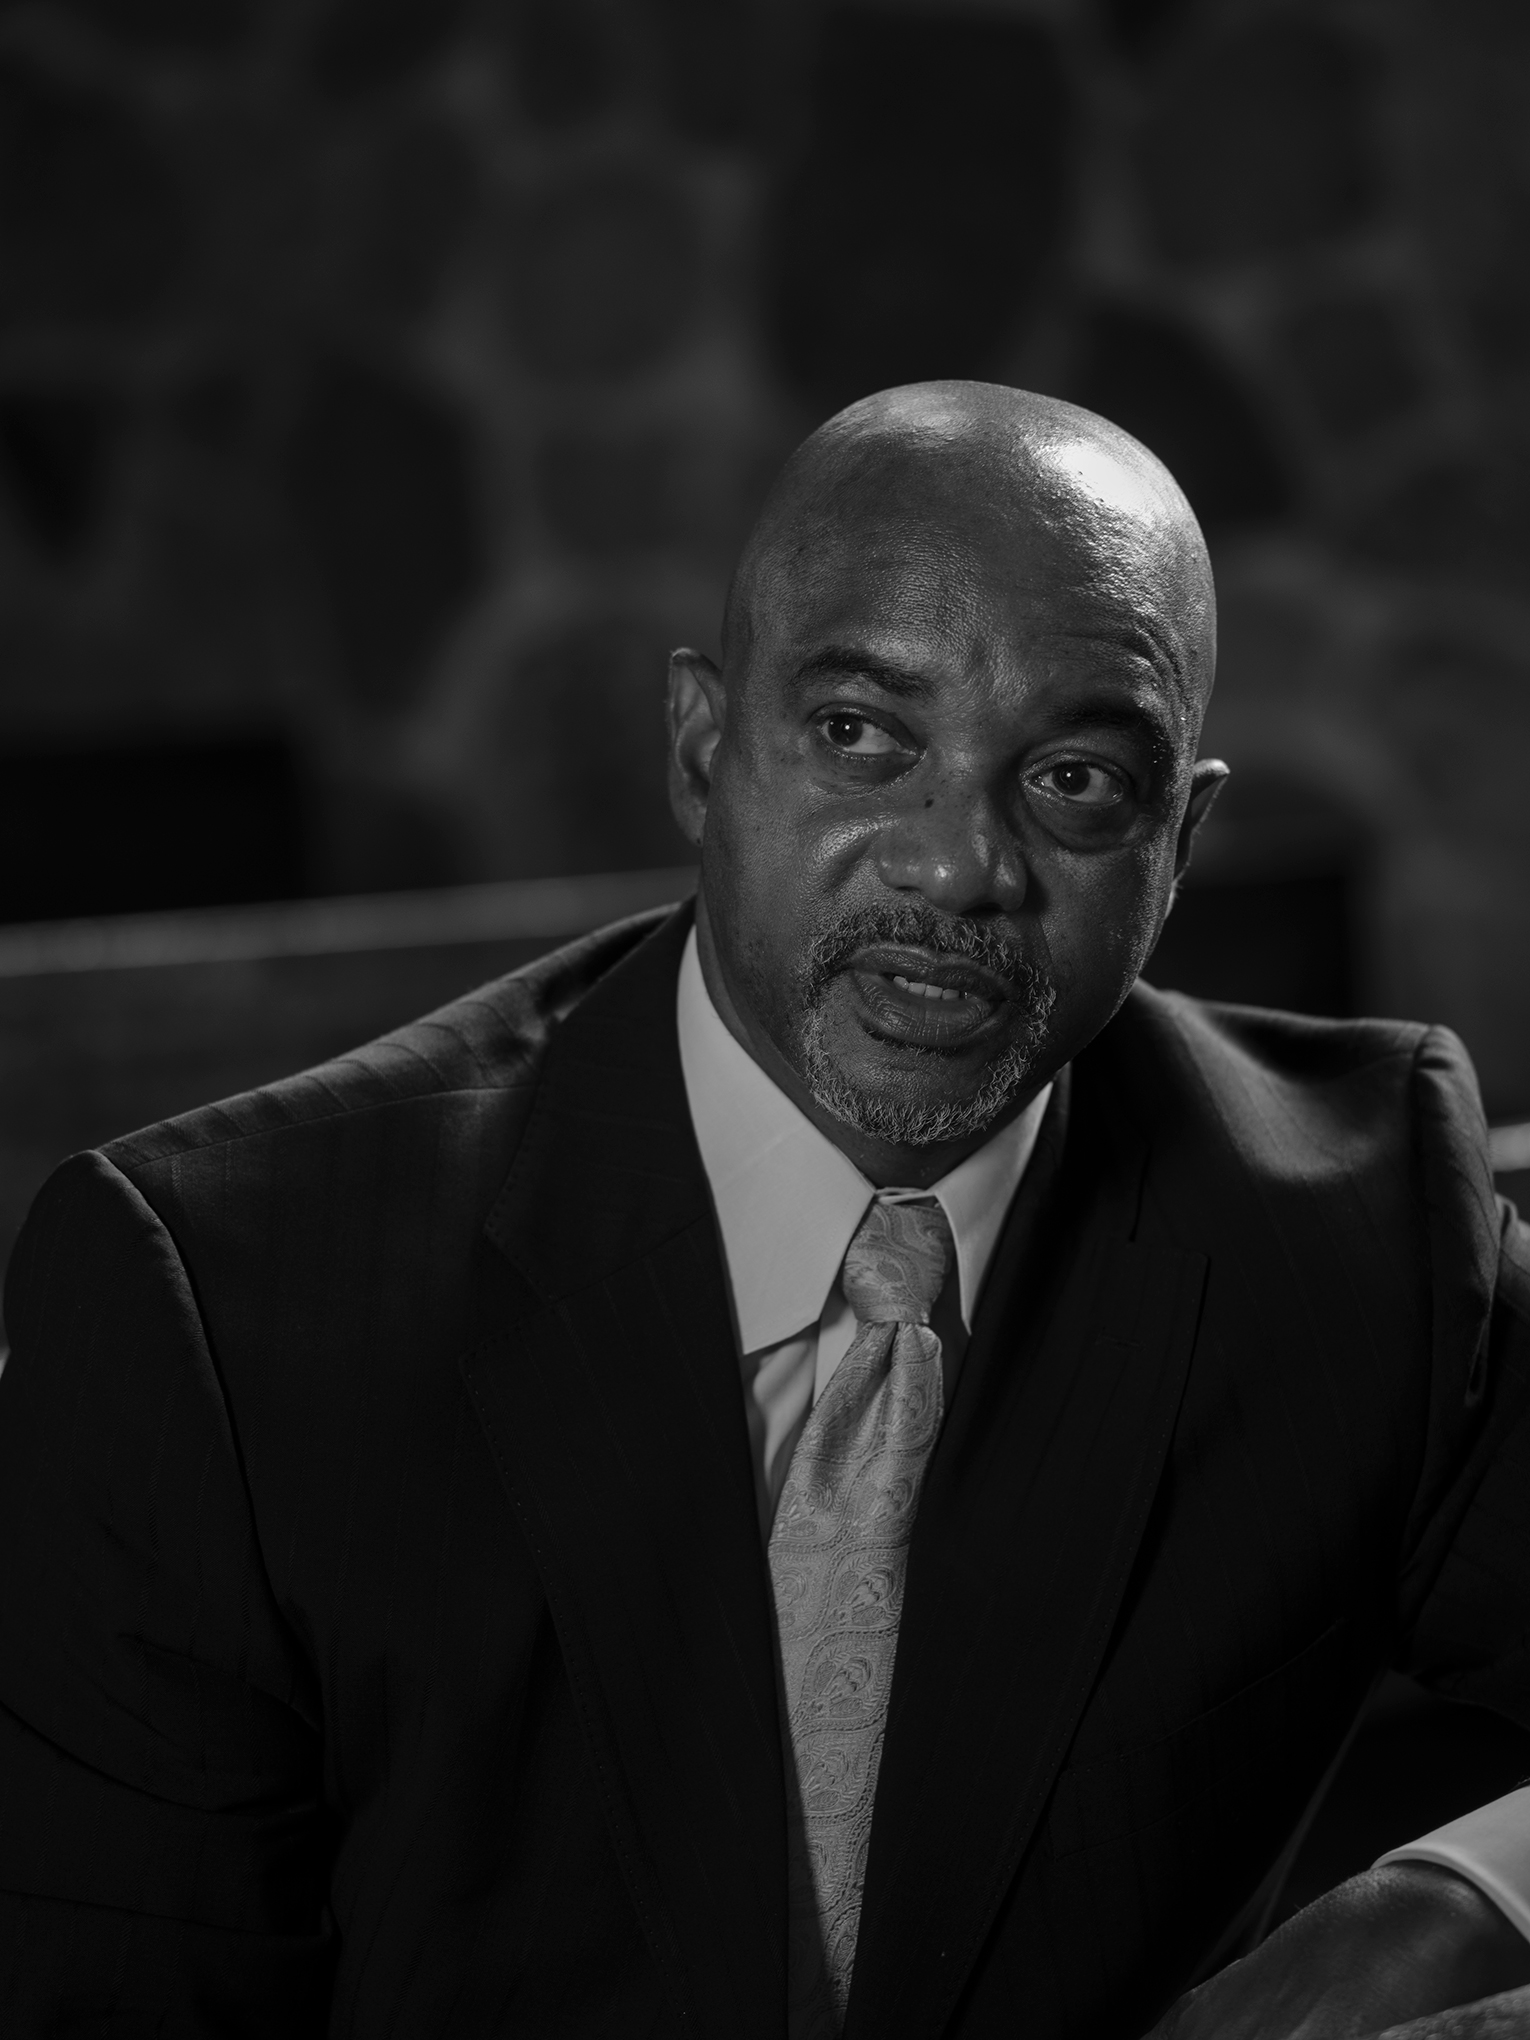 The Rev. Jerry McAfee relies on former and active Minneapolis gang members to stop violence. “All most people know is this: if you’ve got some issues going on in the community, you normally call that group, and somebody in there can get order, within the community.” (Rahim Fortune for TIME)